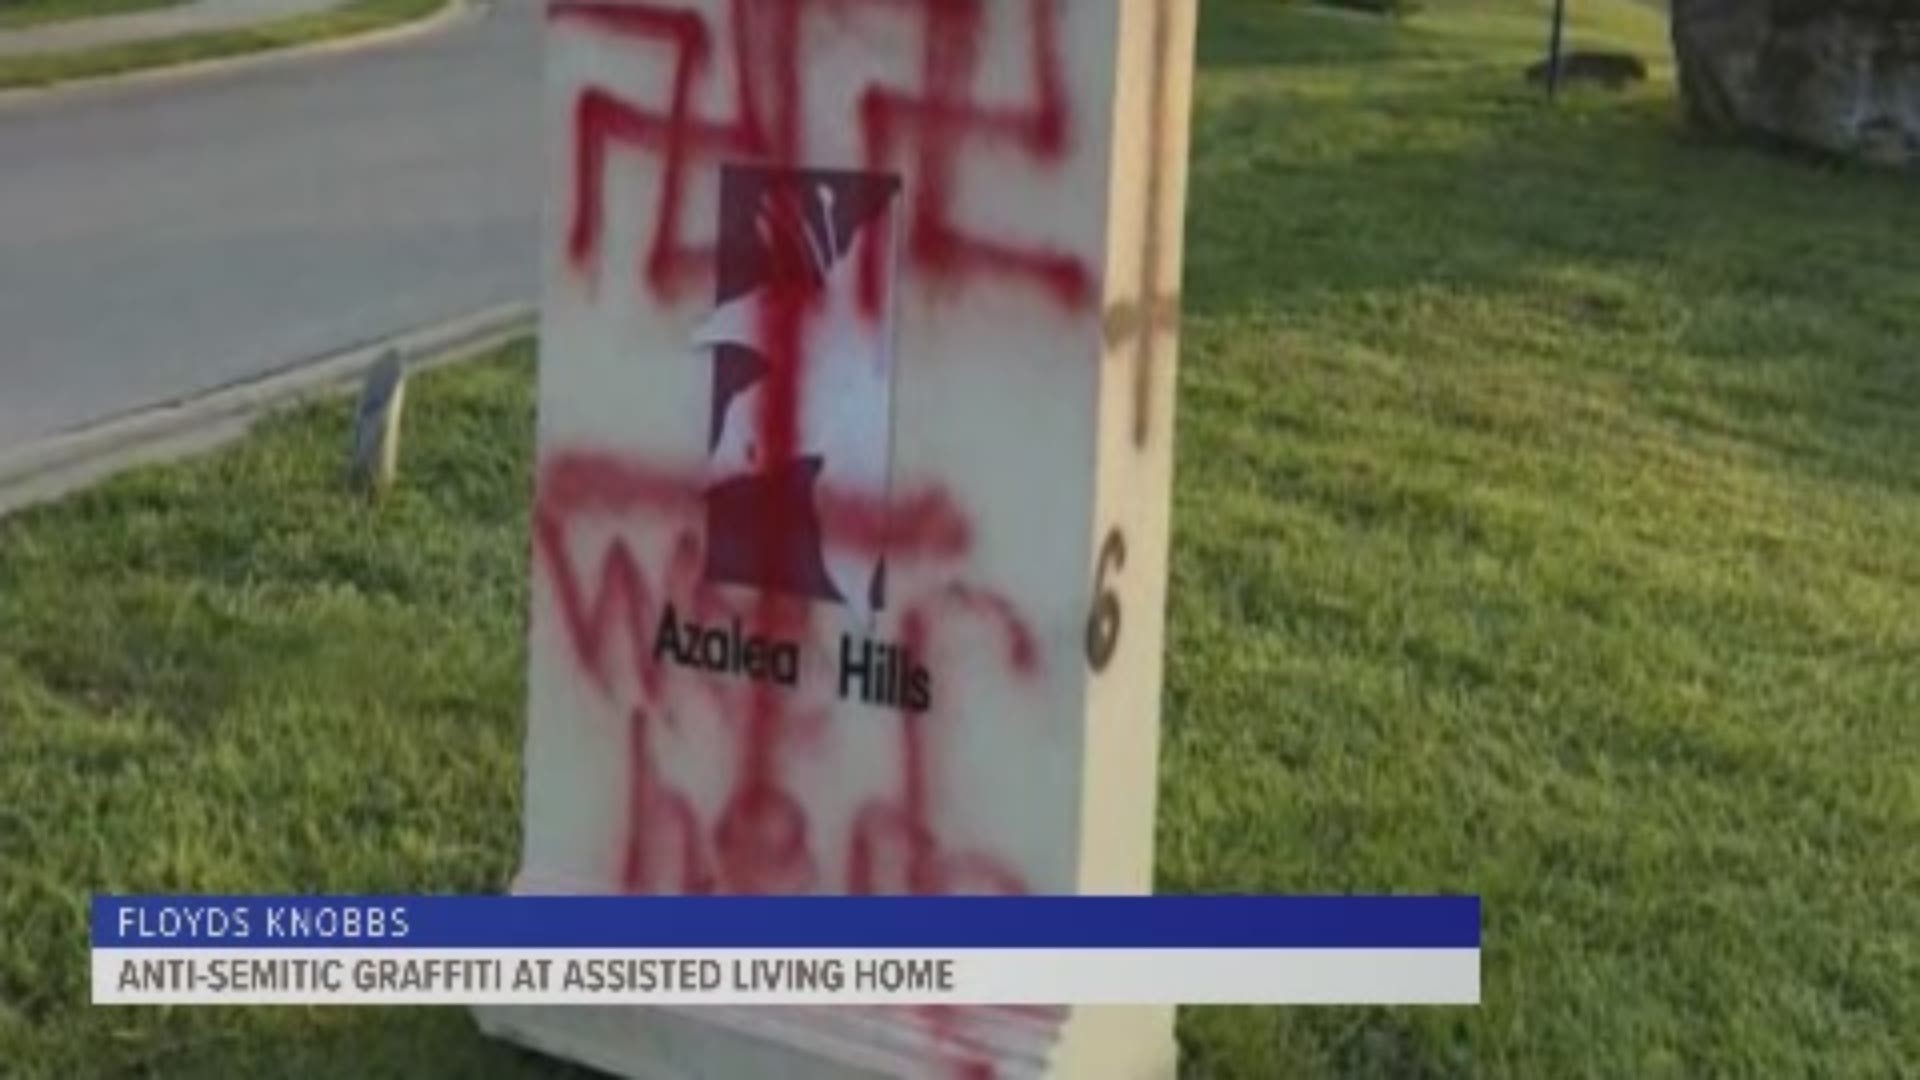 Authorities are investigating after Nazi graffiti was found outside an assisted living facility in Floyds Knobs, Indiana.